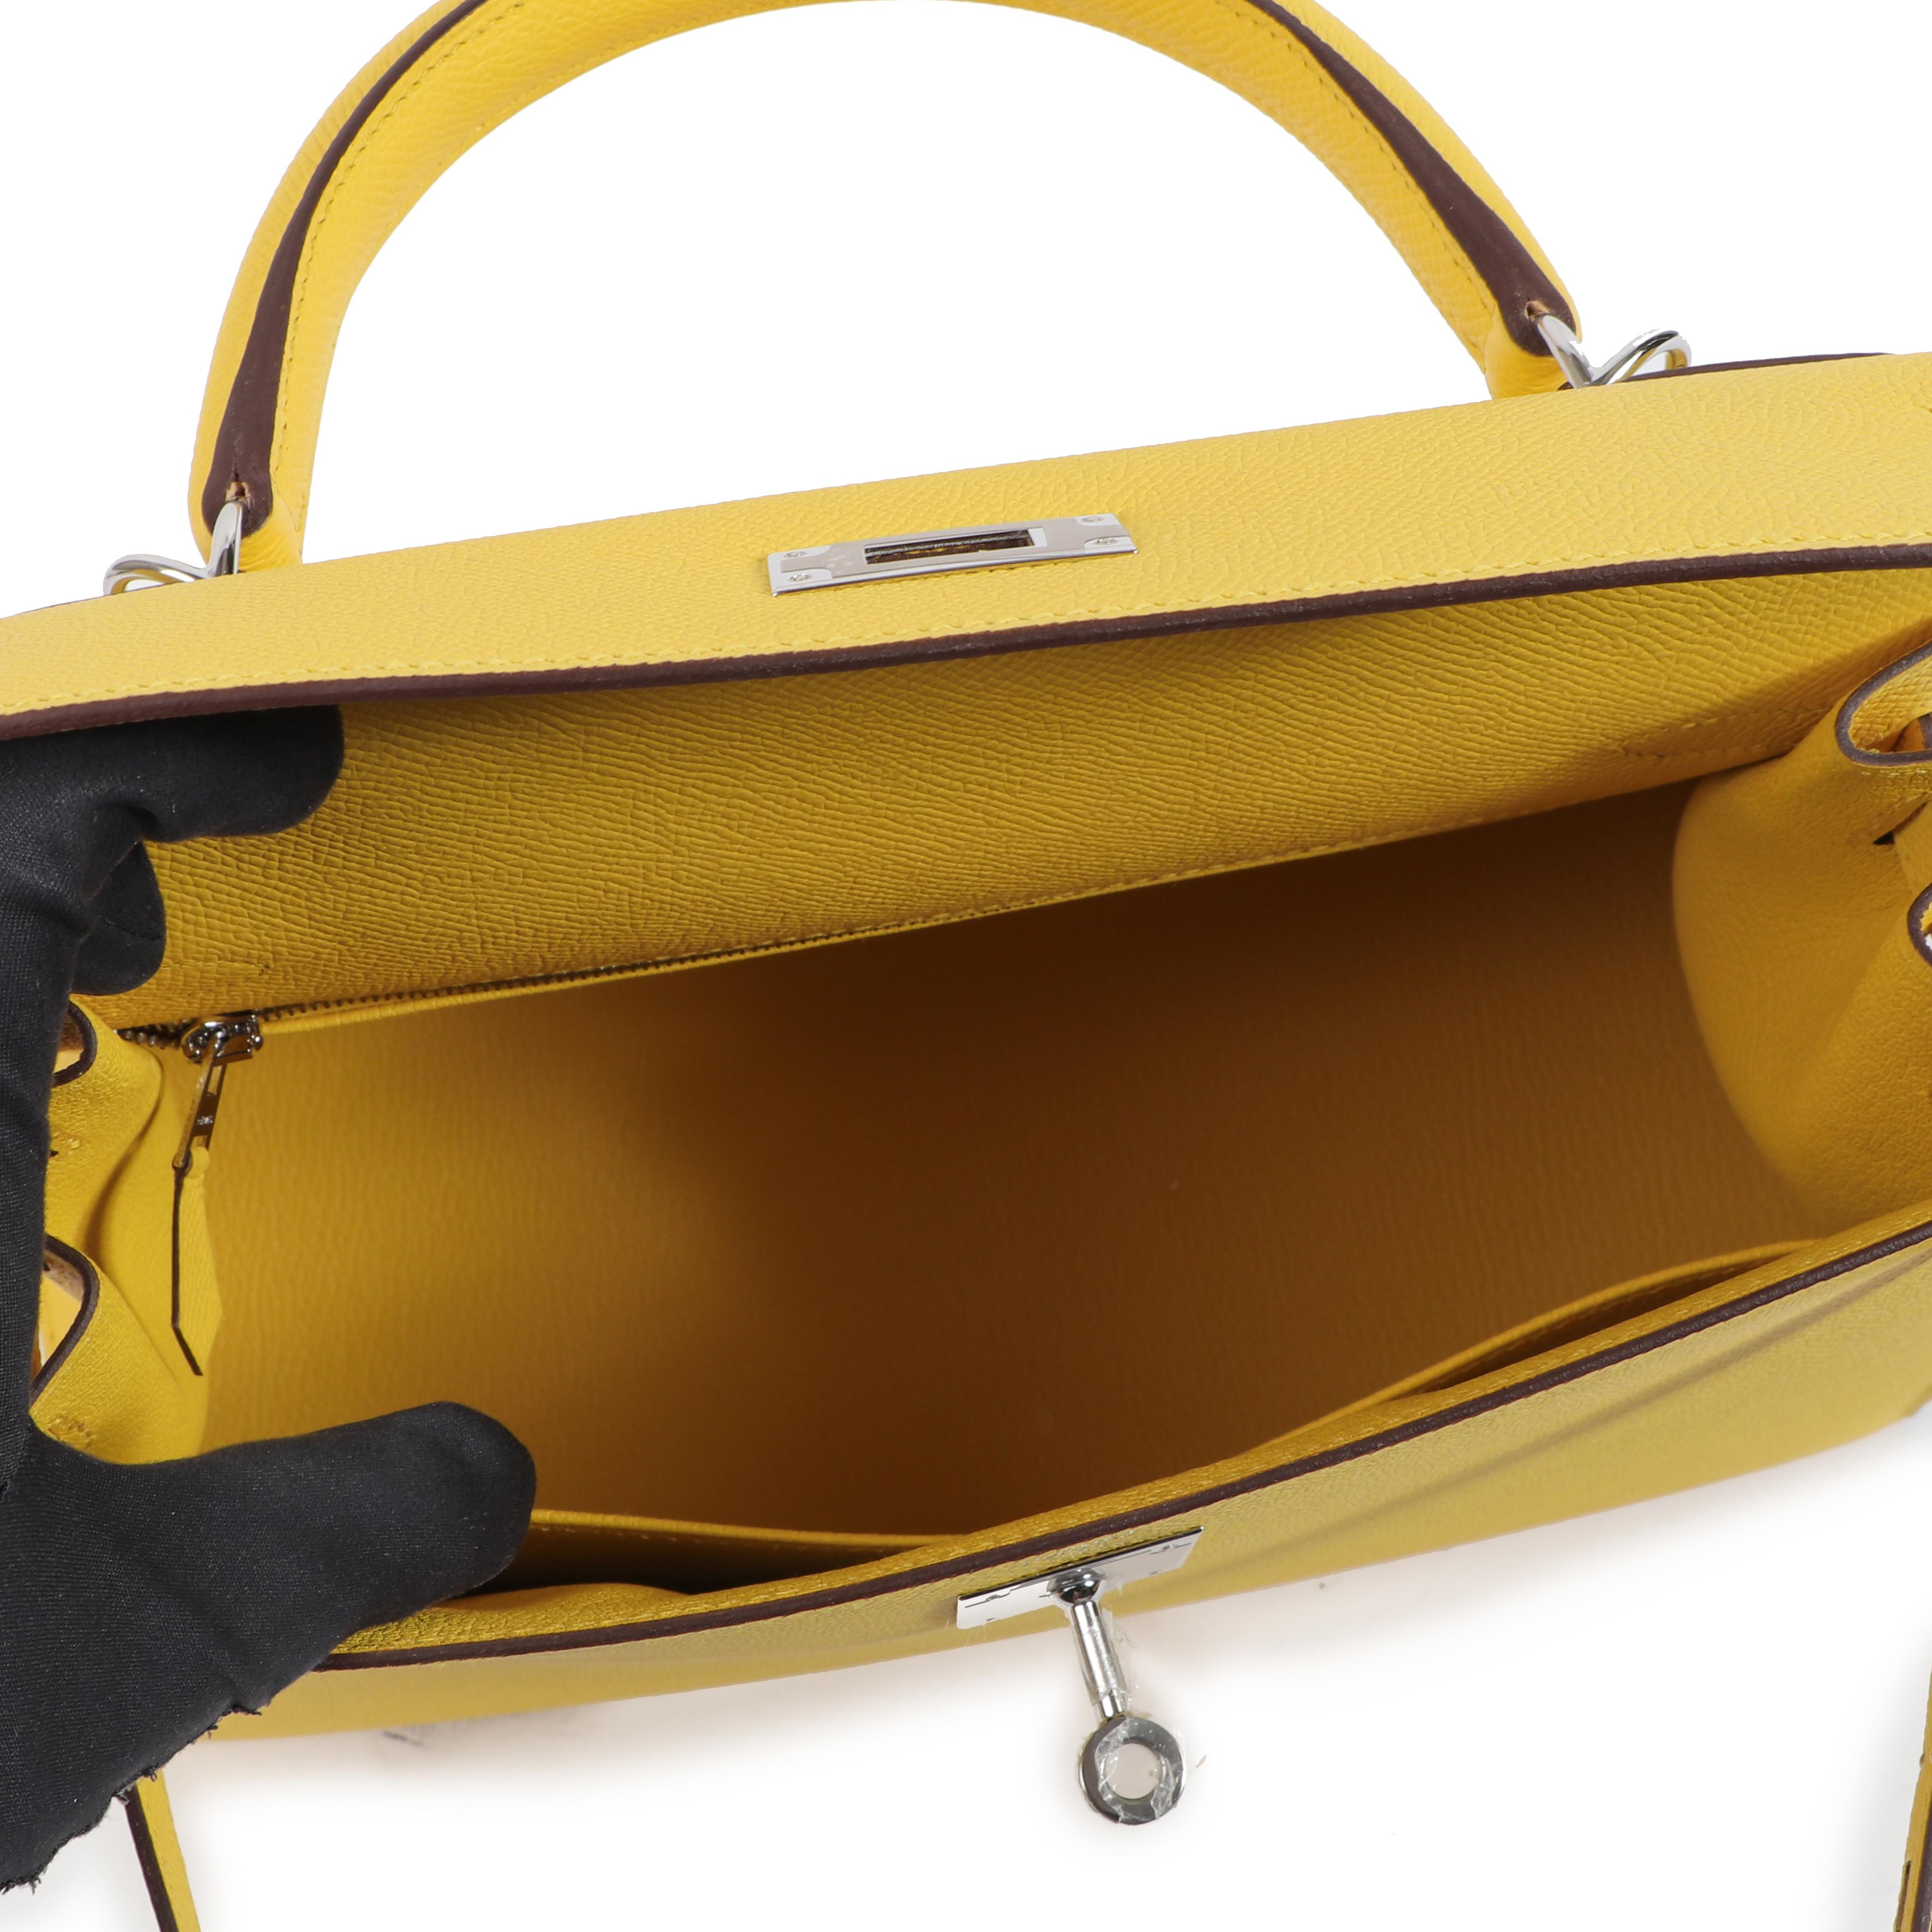 Hermès Kelly 28 Jaune De Naples Epsom Palladium Hardware

A bright yellow color that is mood boosting and show stopping, this Hermès Kelly 28 in Jaune de Naples yellow is incredibly glowing.

Made in Epsom leather, this Hermès Kelly has the rigid